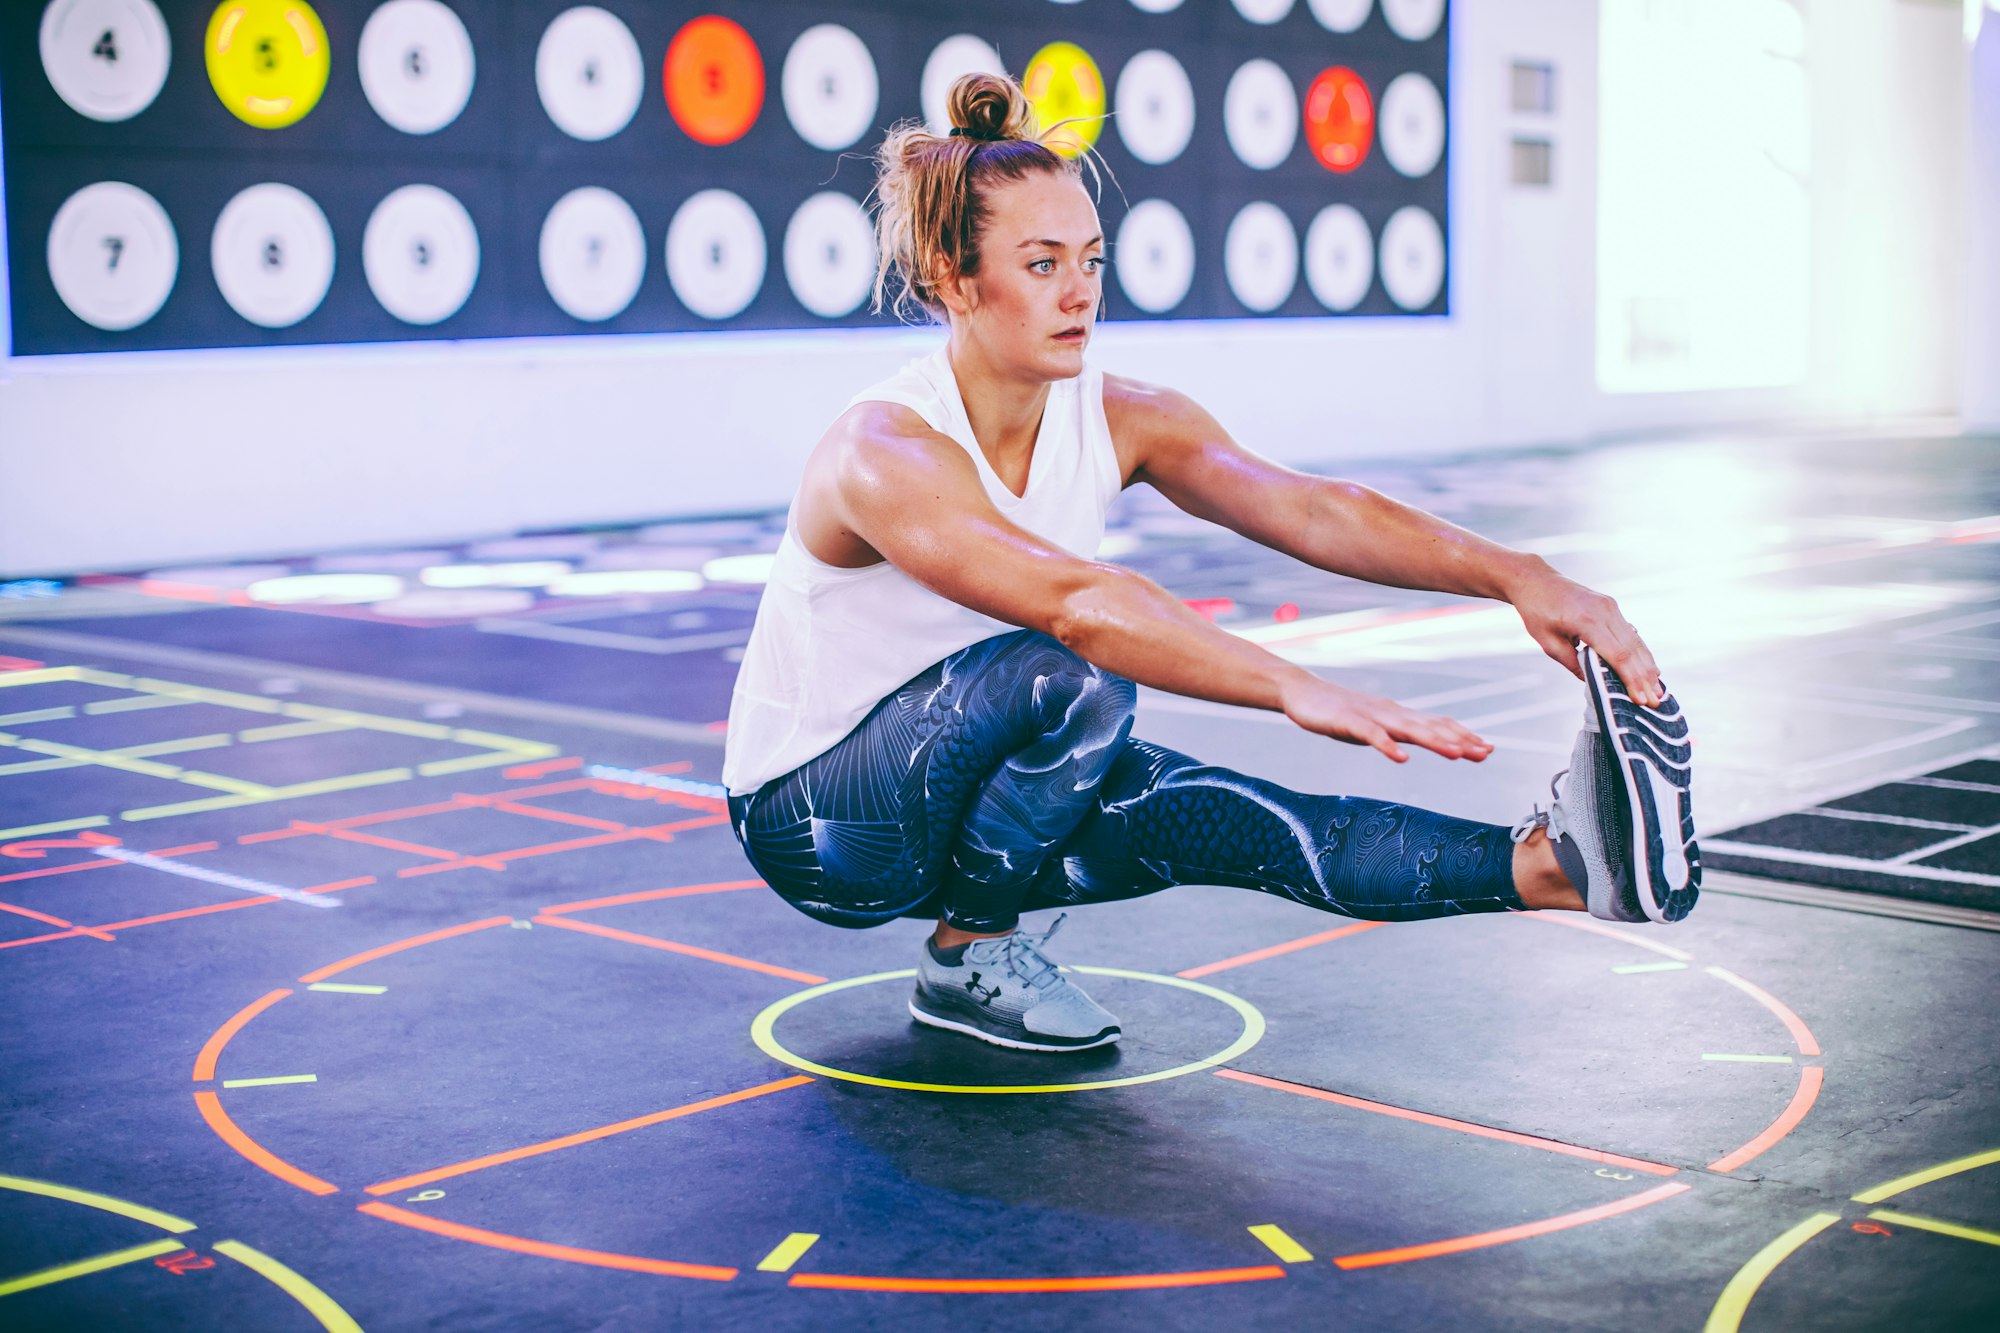 Woman doing pistol squats with floor markings in Prama